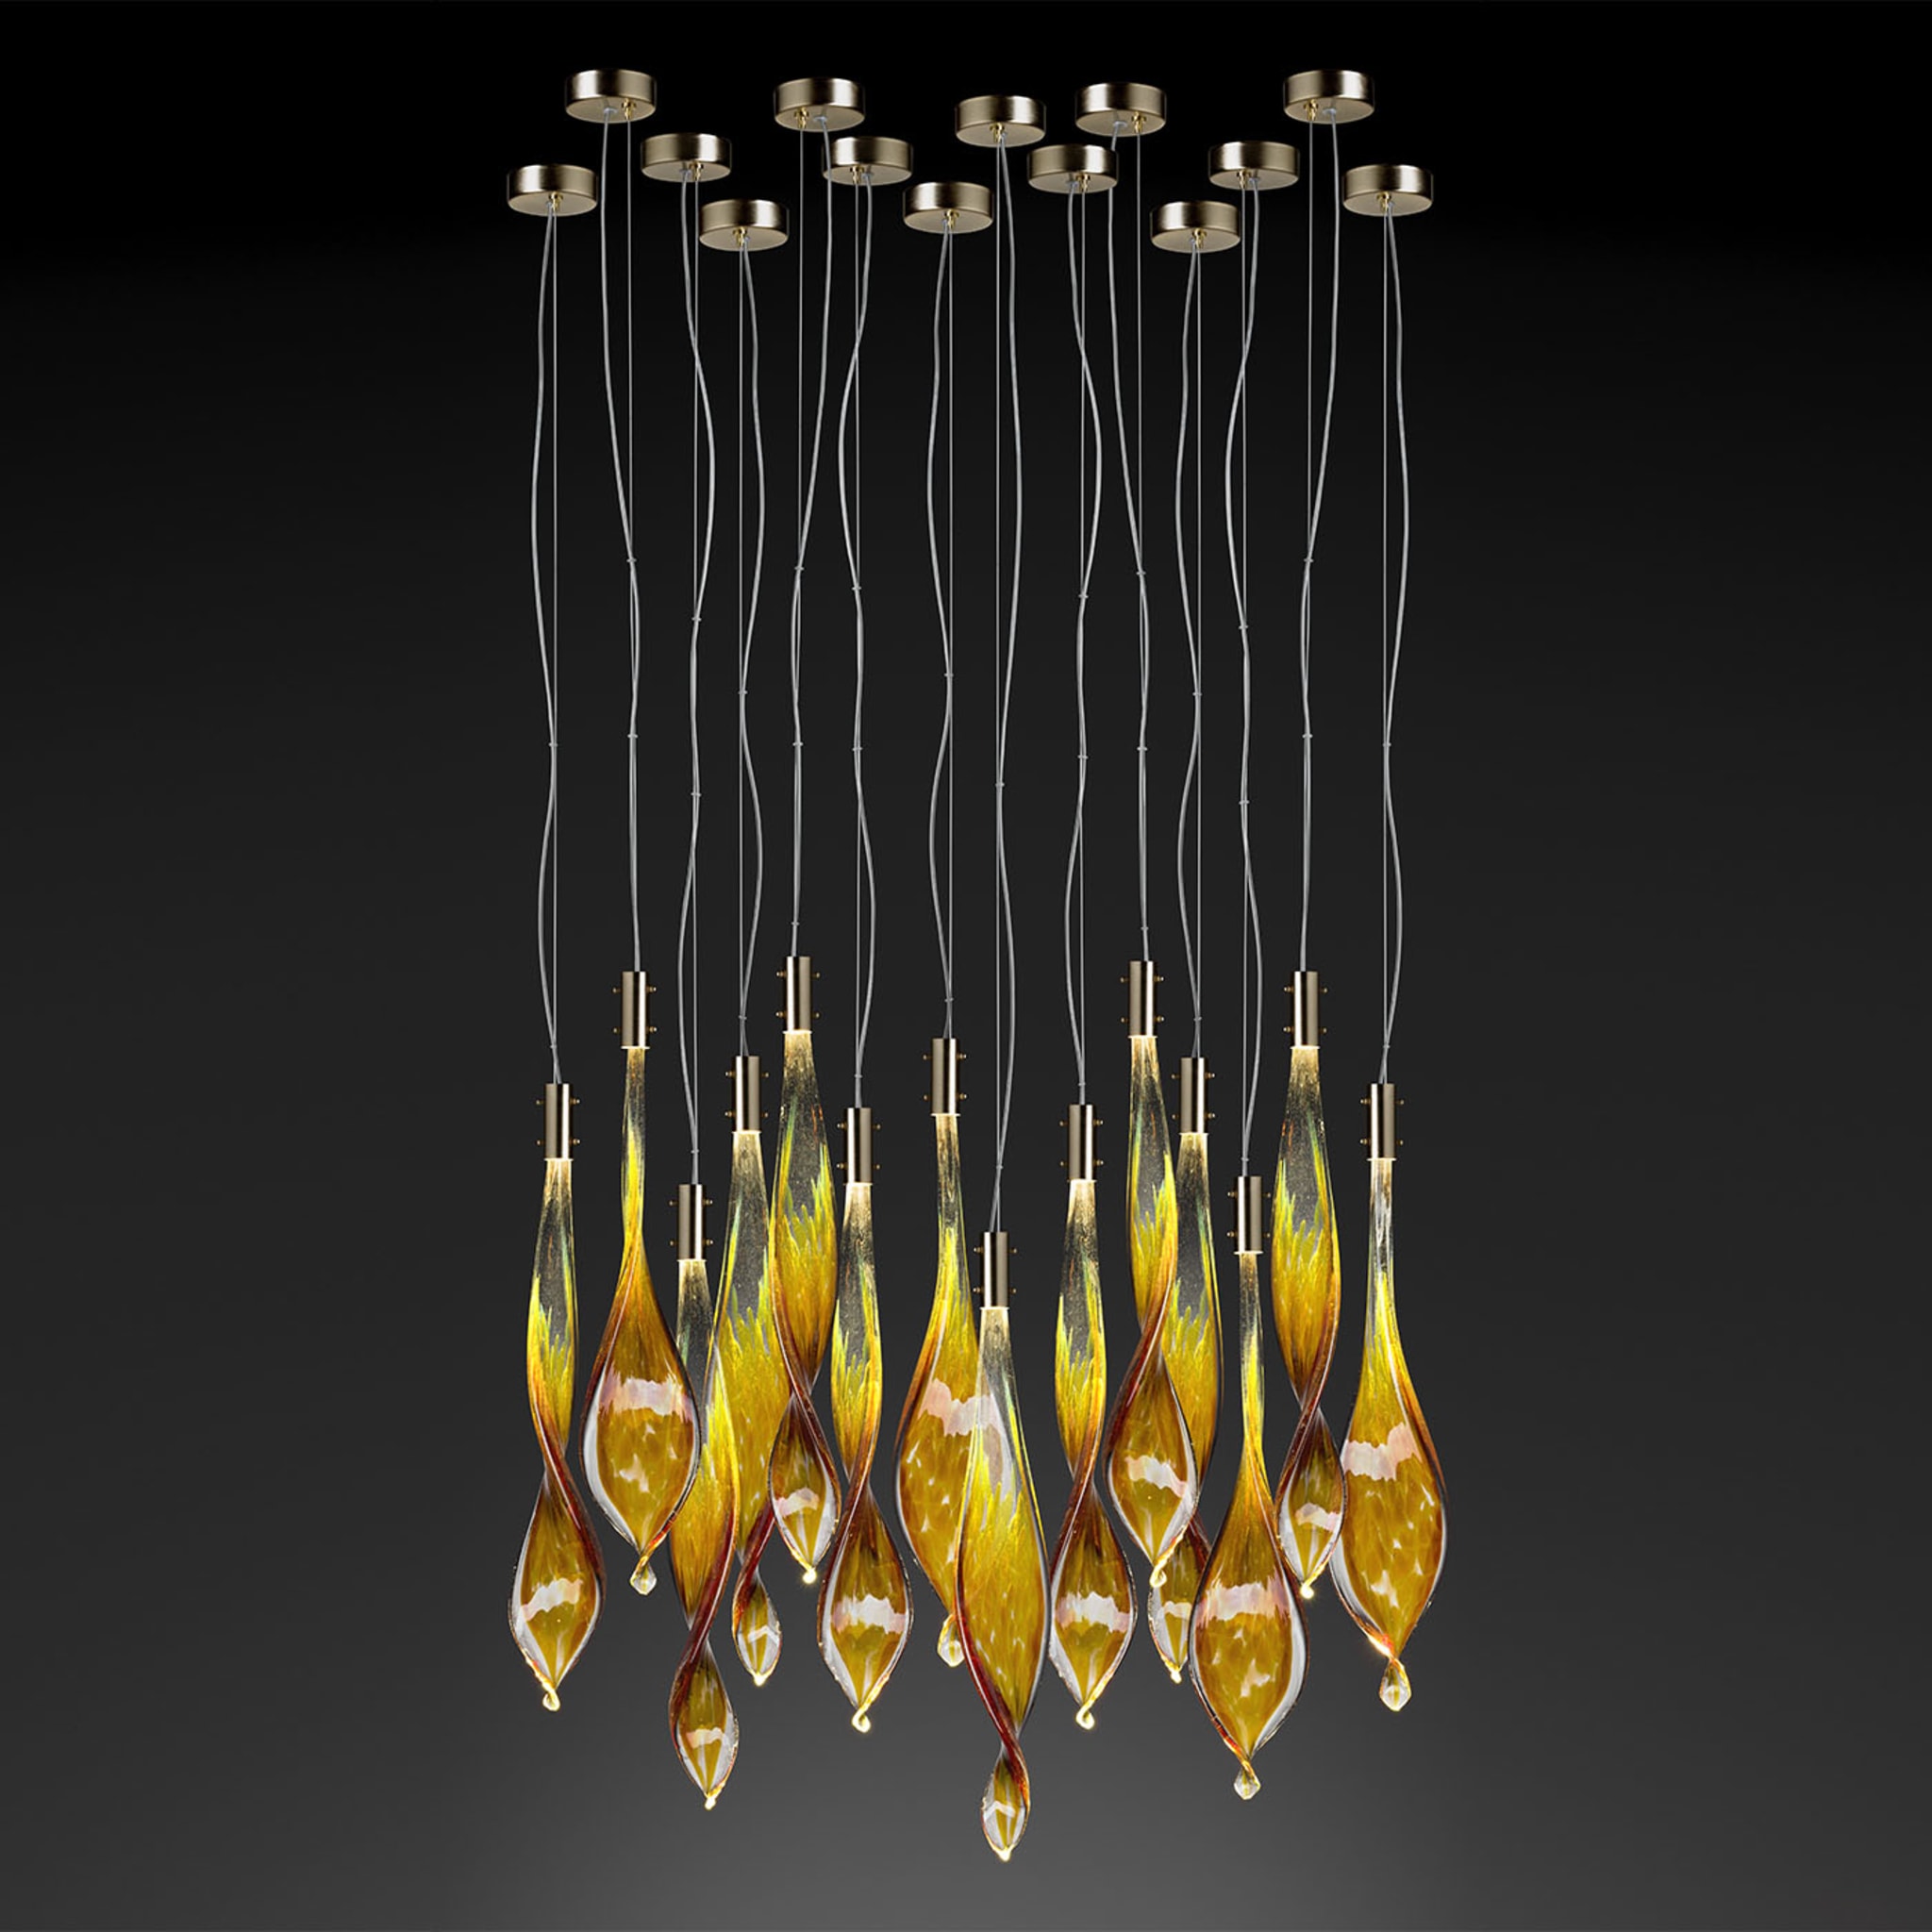 Glass Fall 15 Leaves Chandelier - Alternative view 1